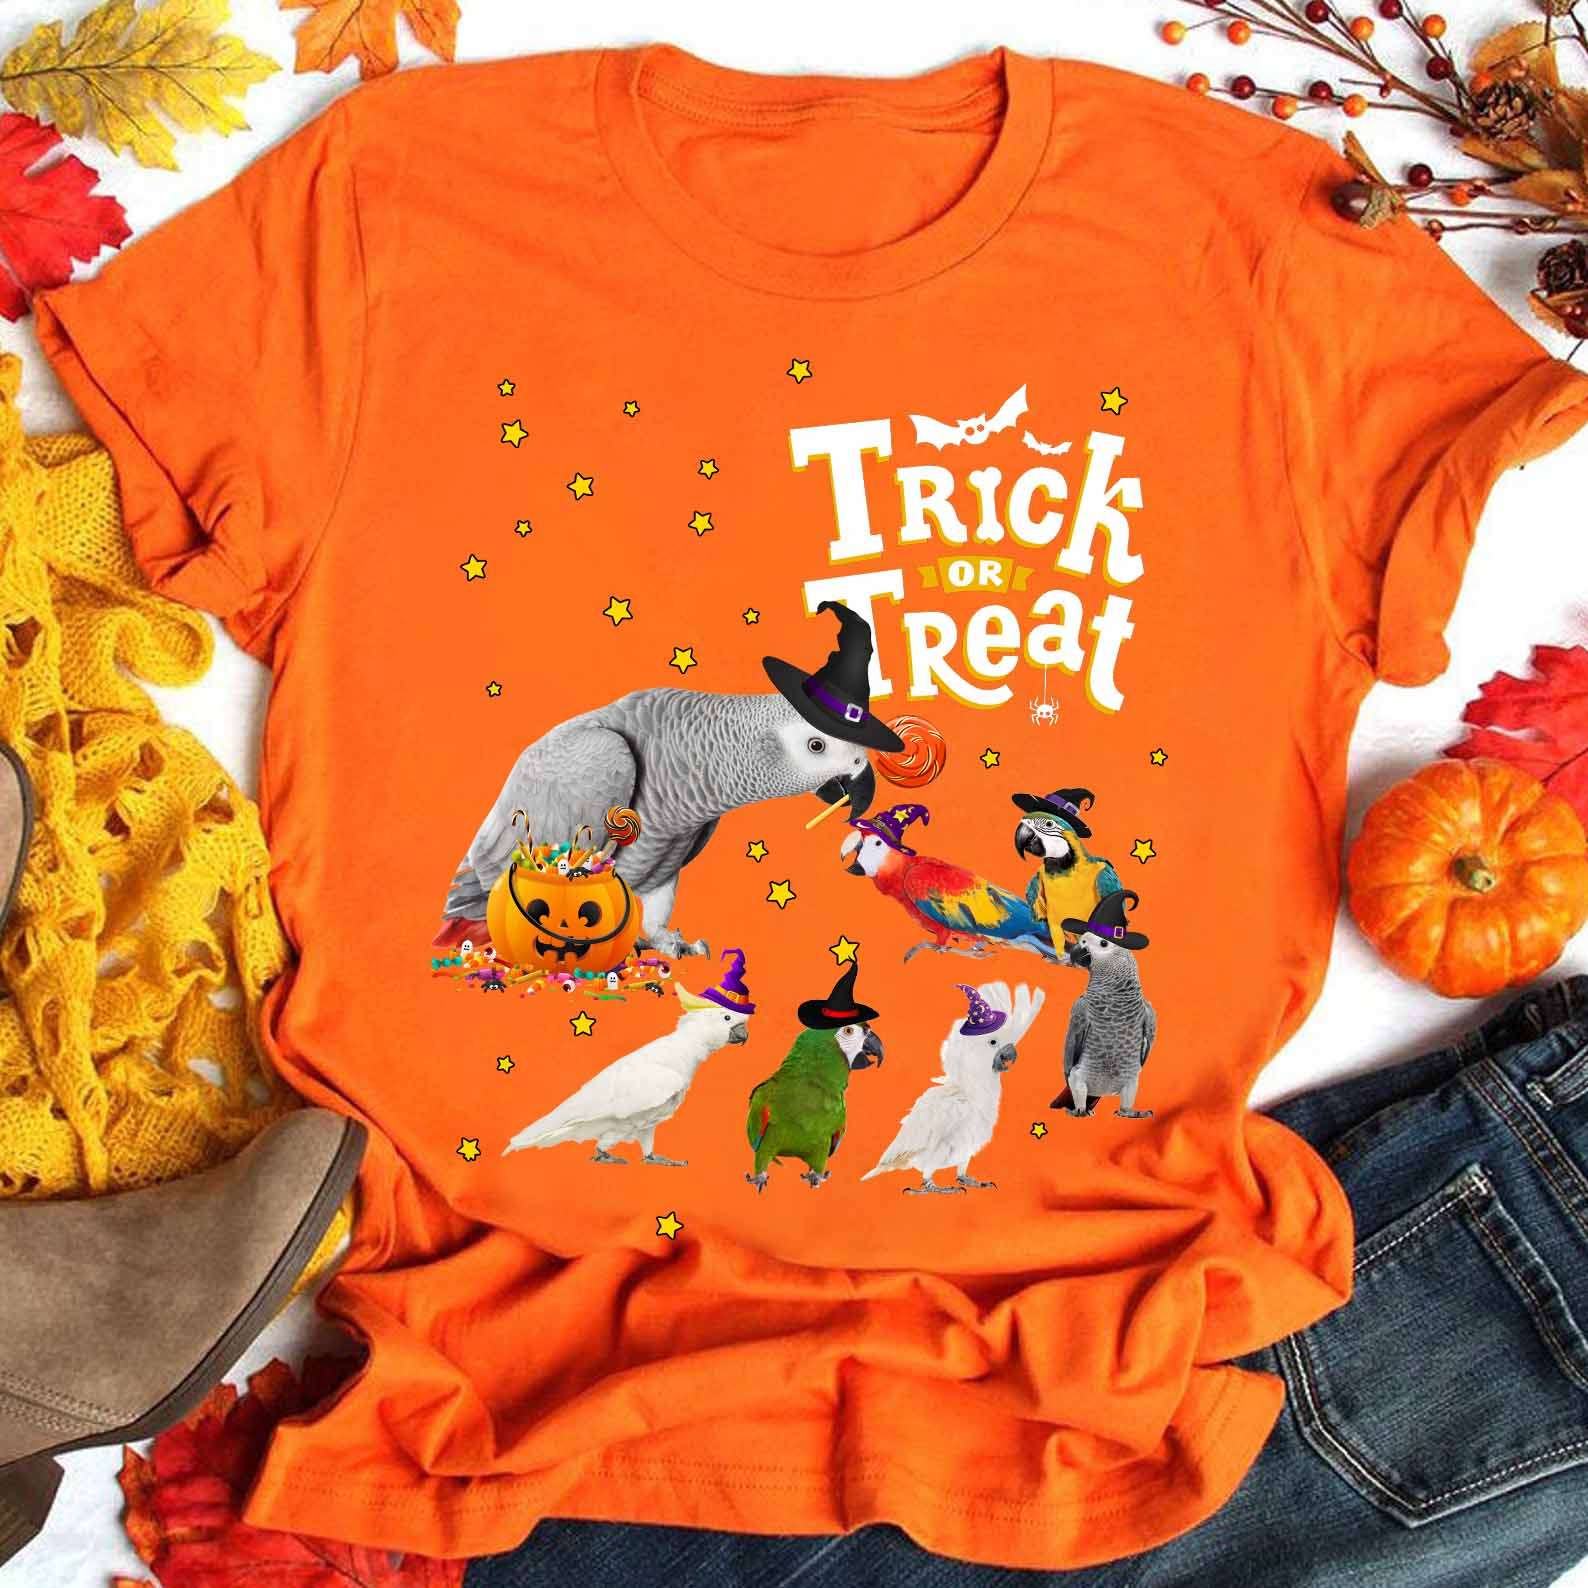 Trick or treat - Parrot witch, Halloween pumpkin and candy